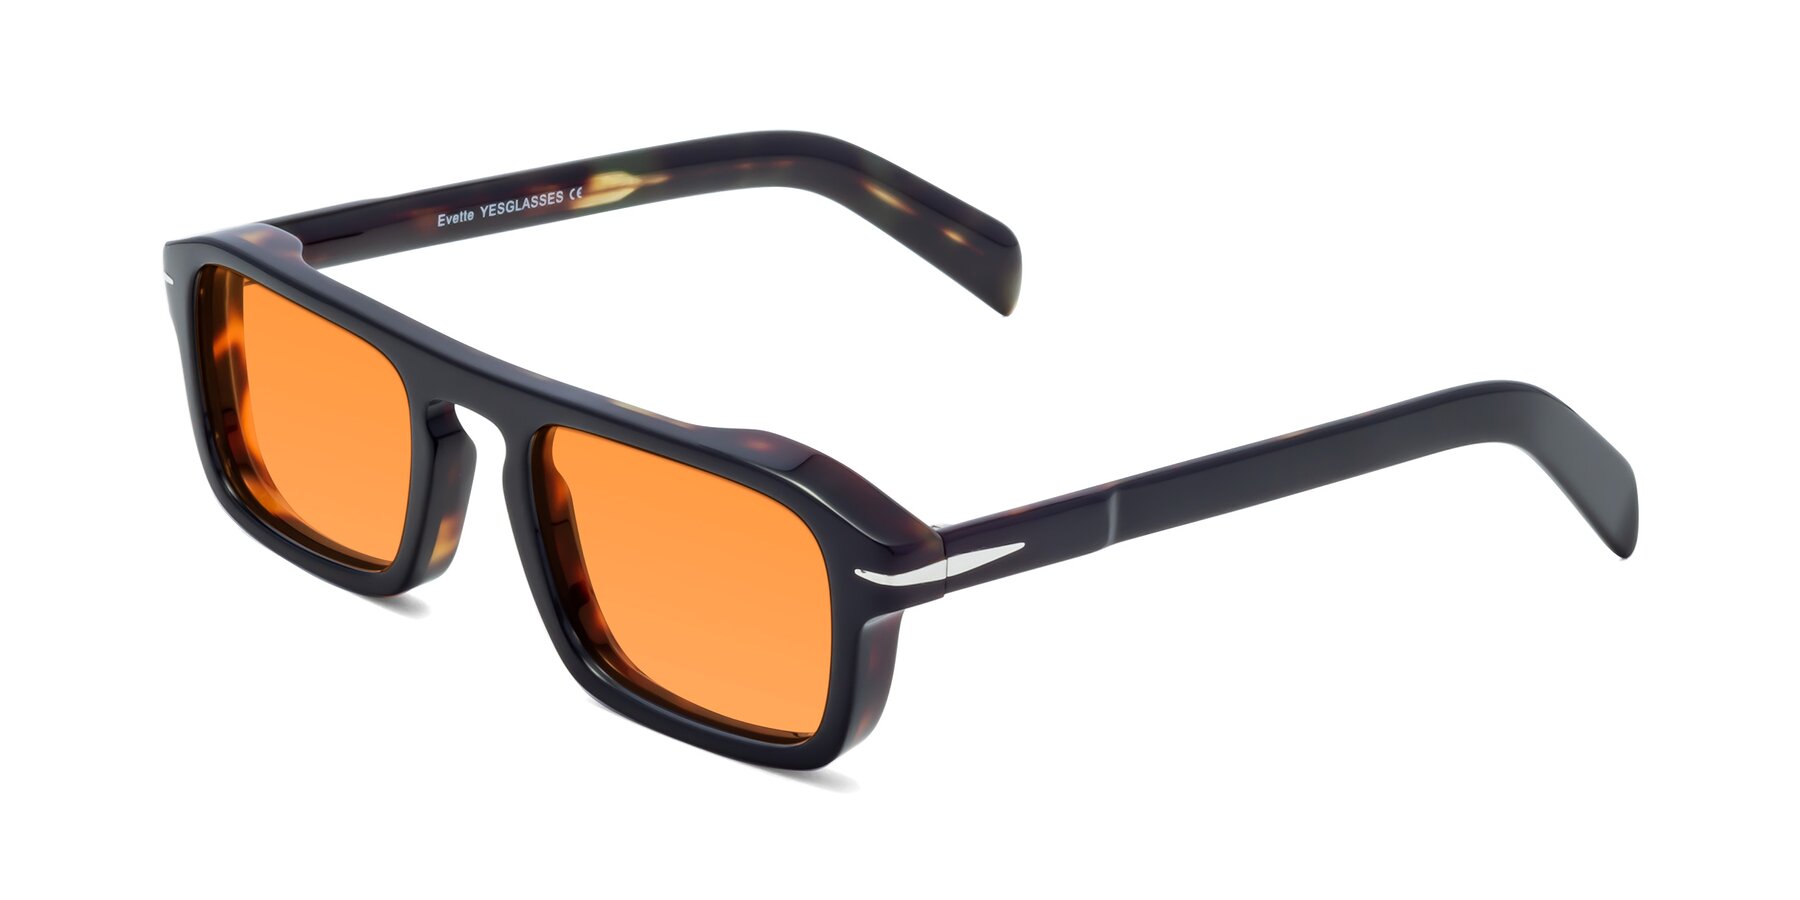 Angle of Evette in Black-Tortoise with Orange Tinted Lenses